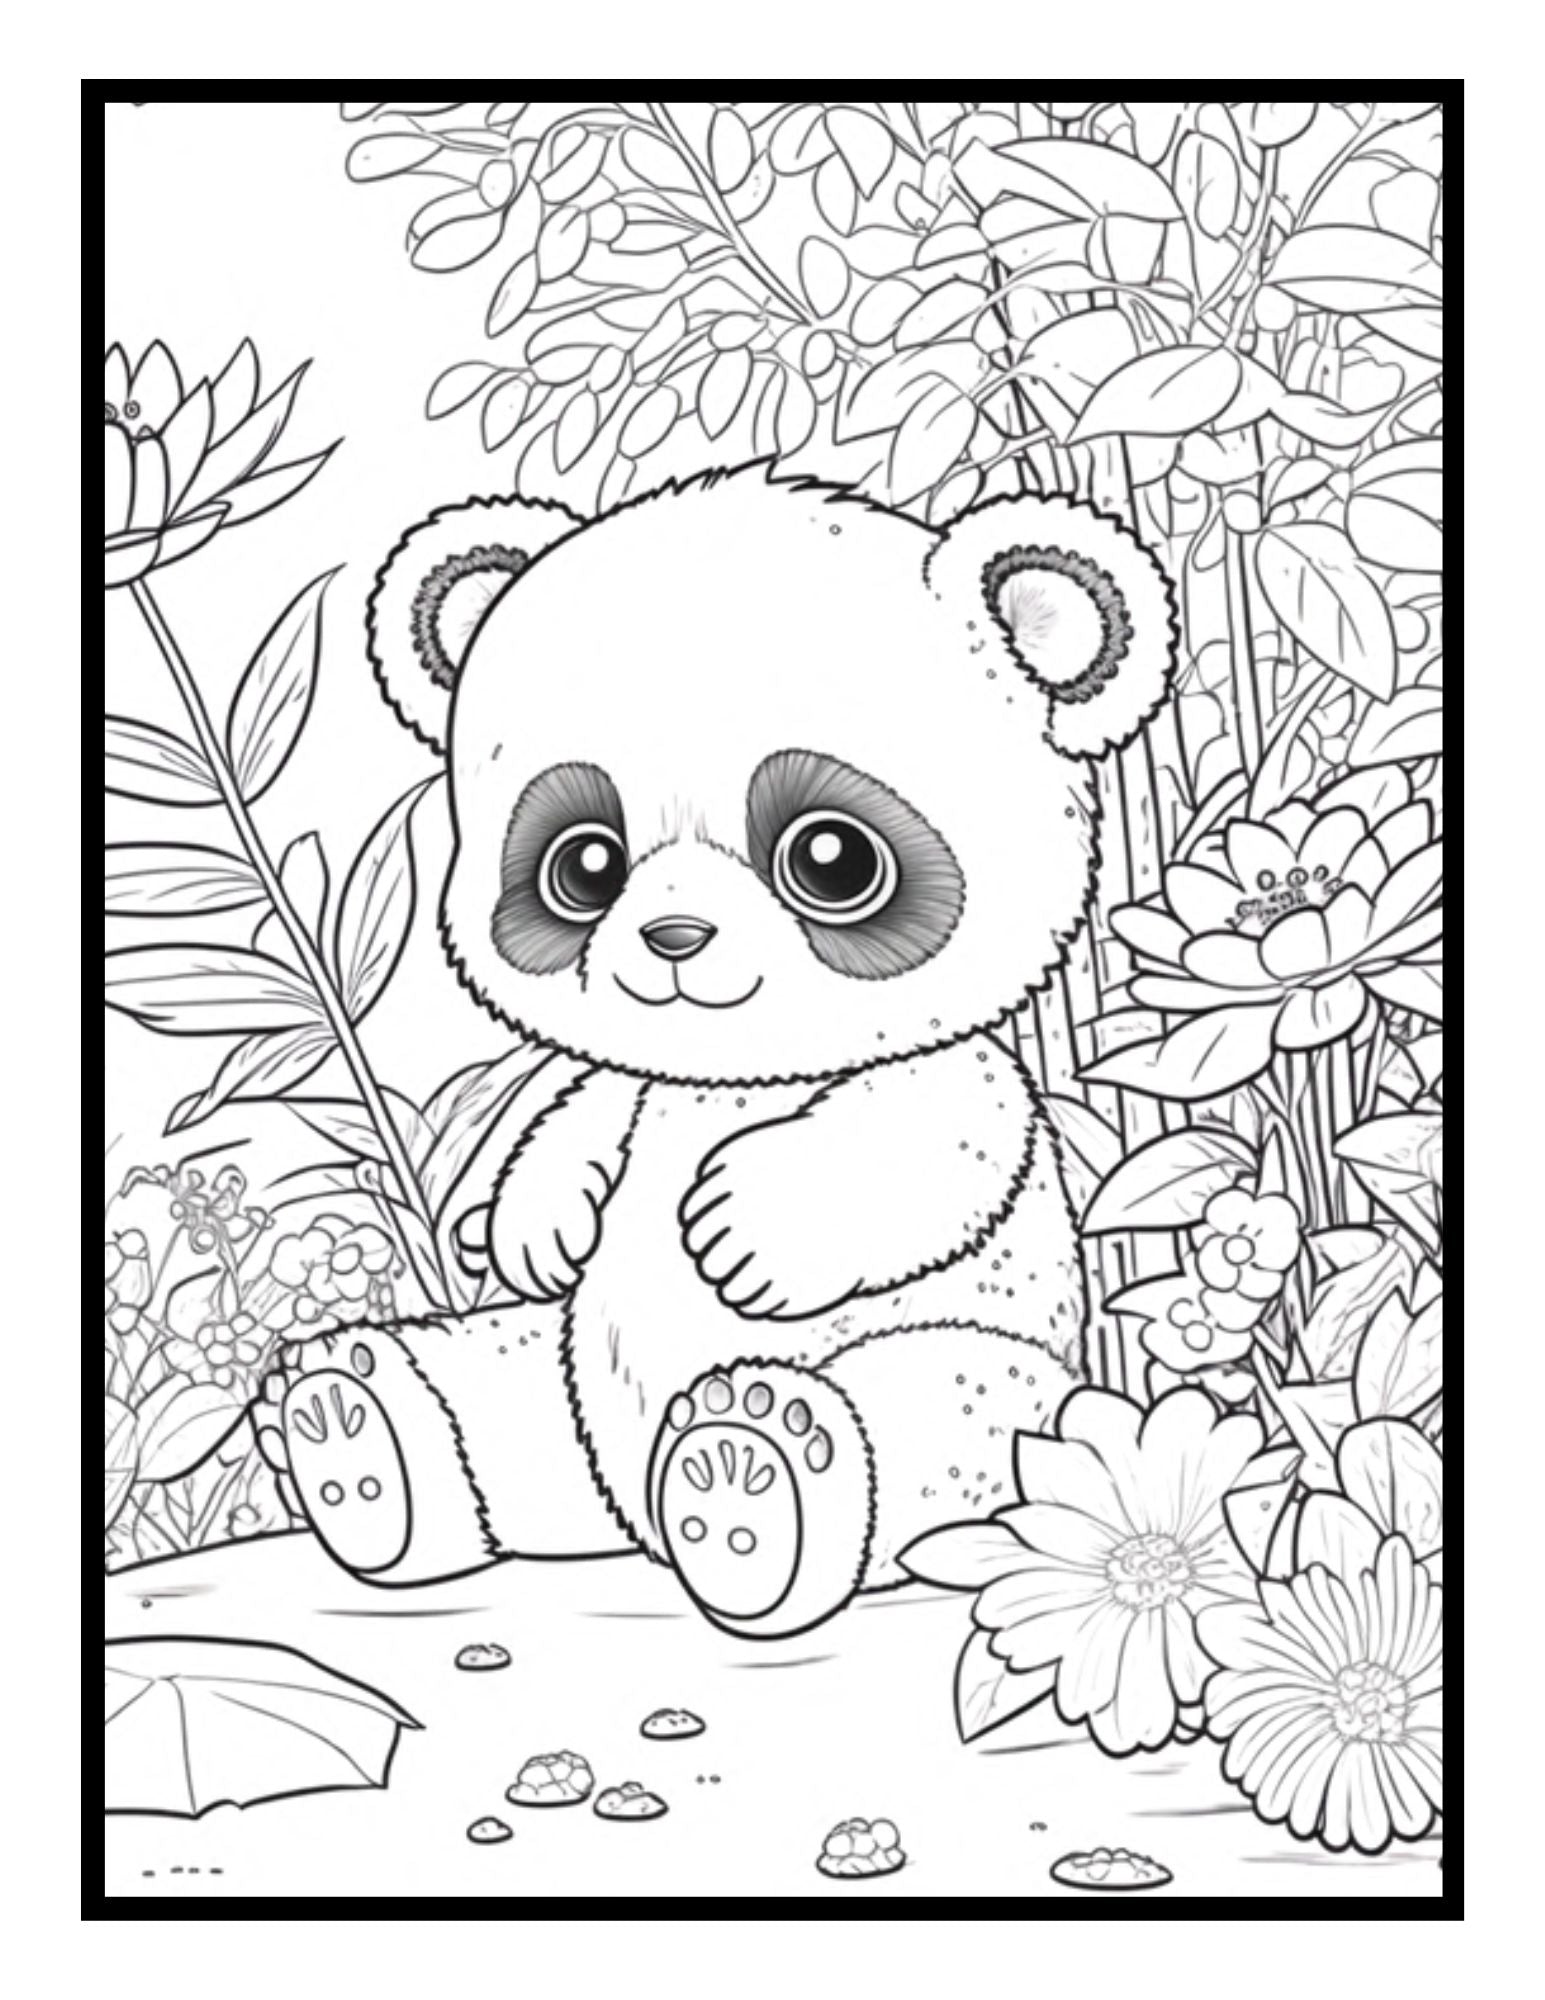 Panda Coloring Book: Stress-Relief Coloring Book for Grown-ups, Adults (Animal Coloring Book) [Book]